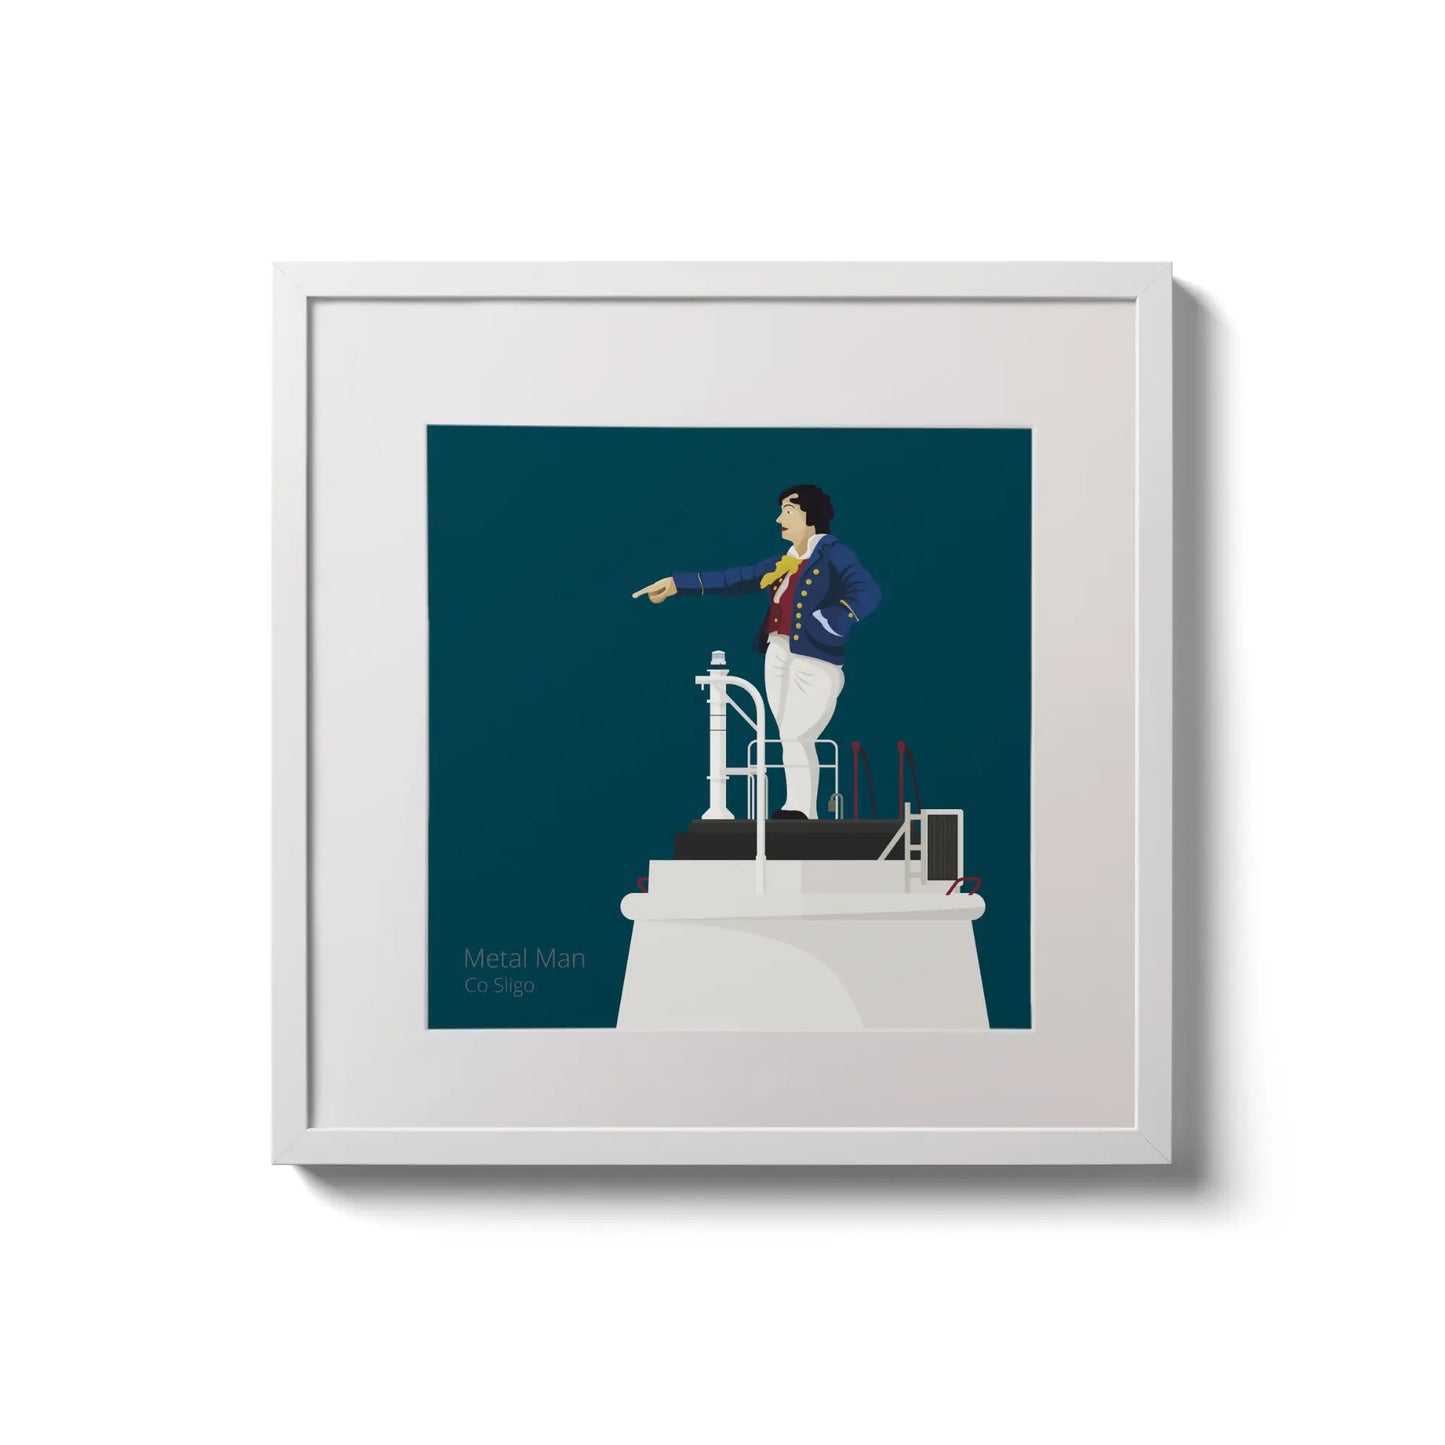 Illustration of Metal Man lighthouse on a midnight blue background,  in a white square frame measuring 20x20cm.